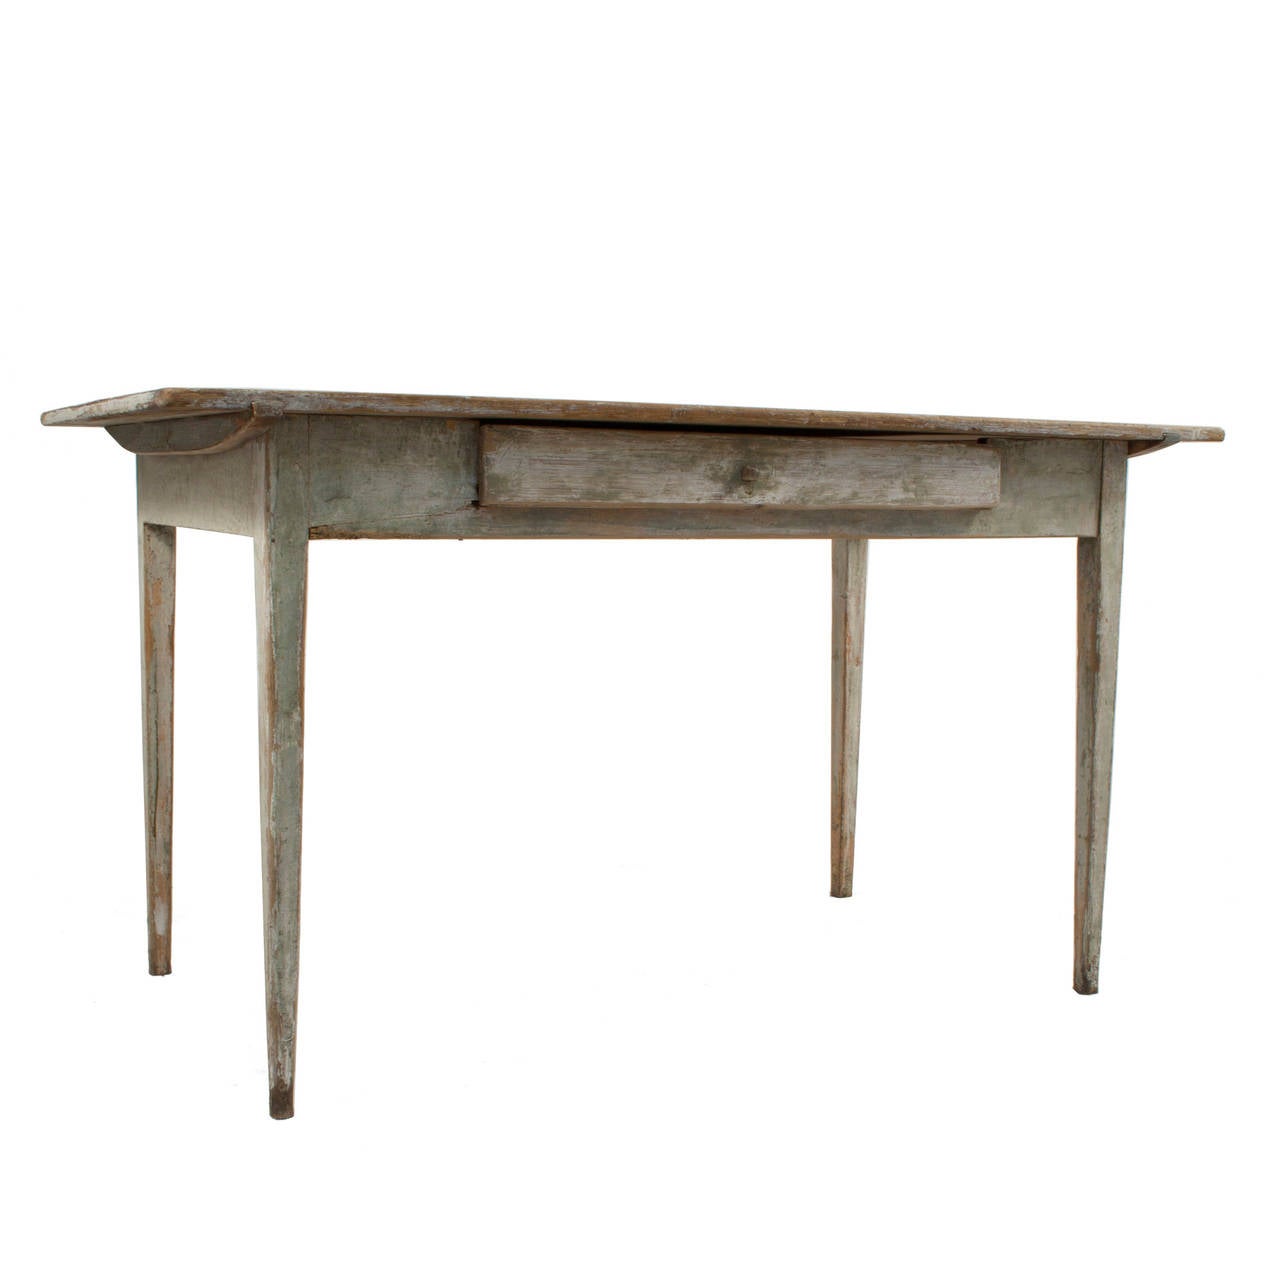 Gustavian desk with one-drawer in a worn grey patina.